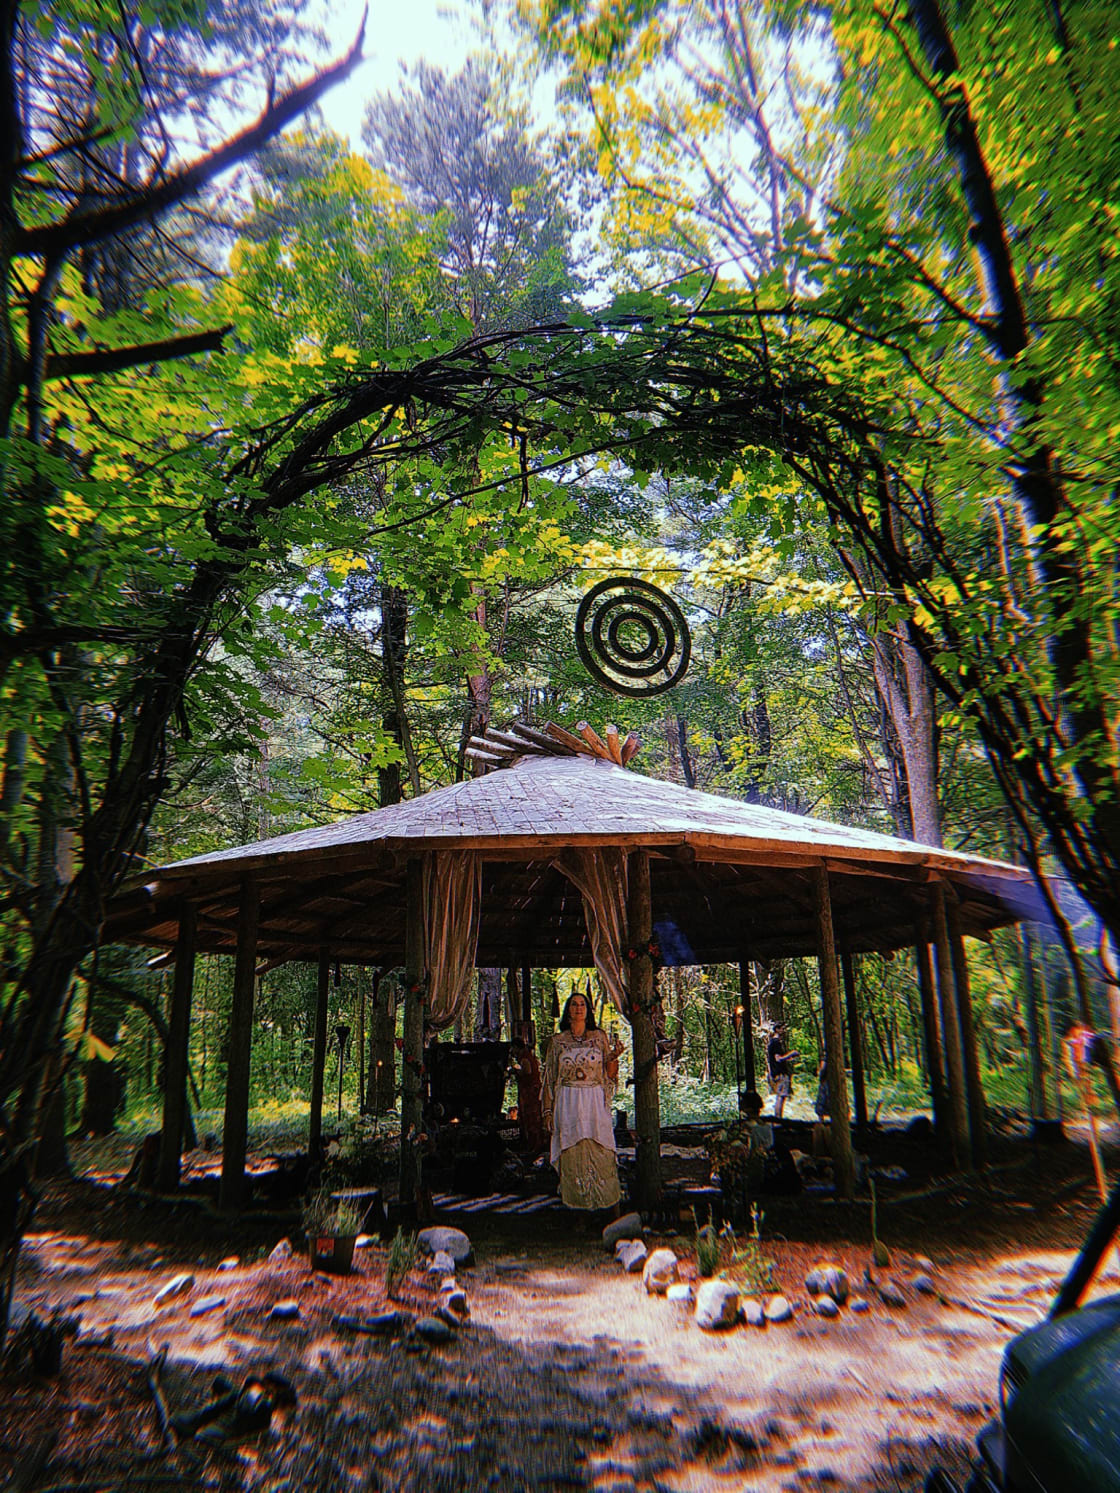 Our temple in the woods